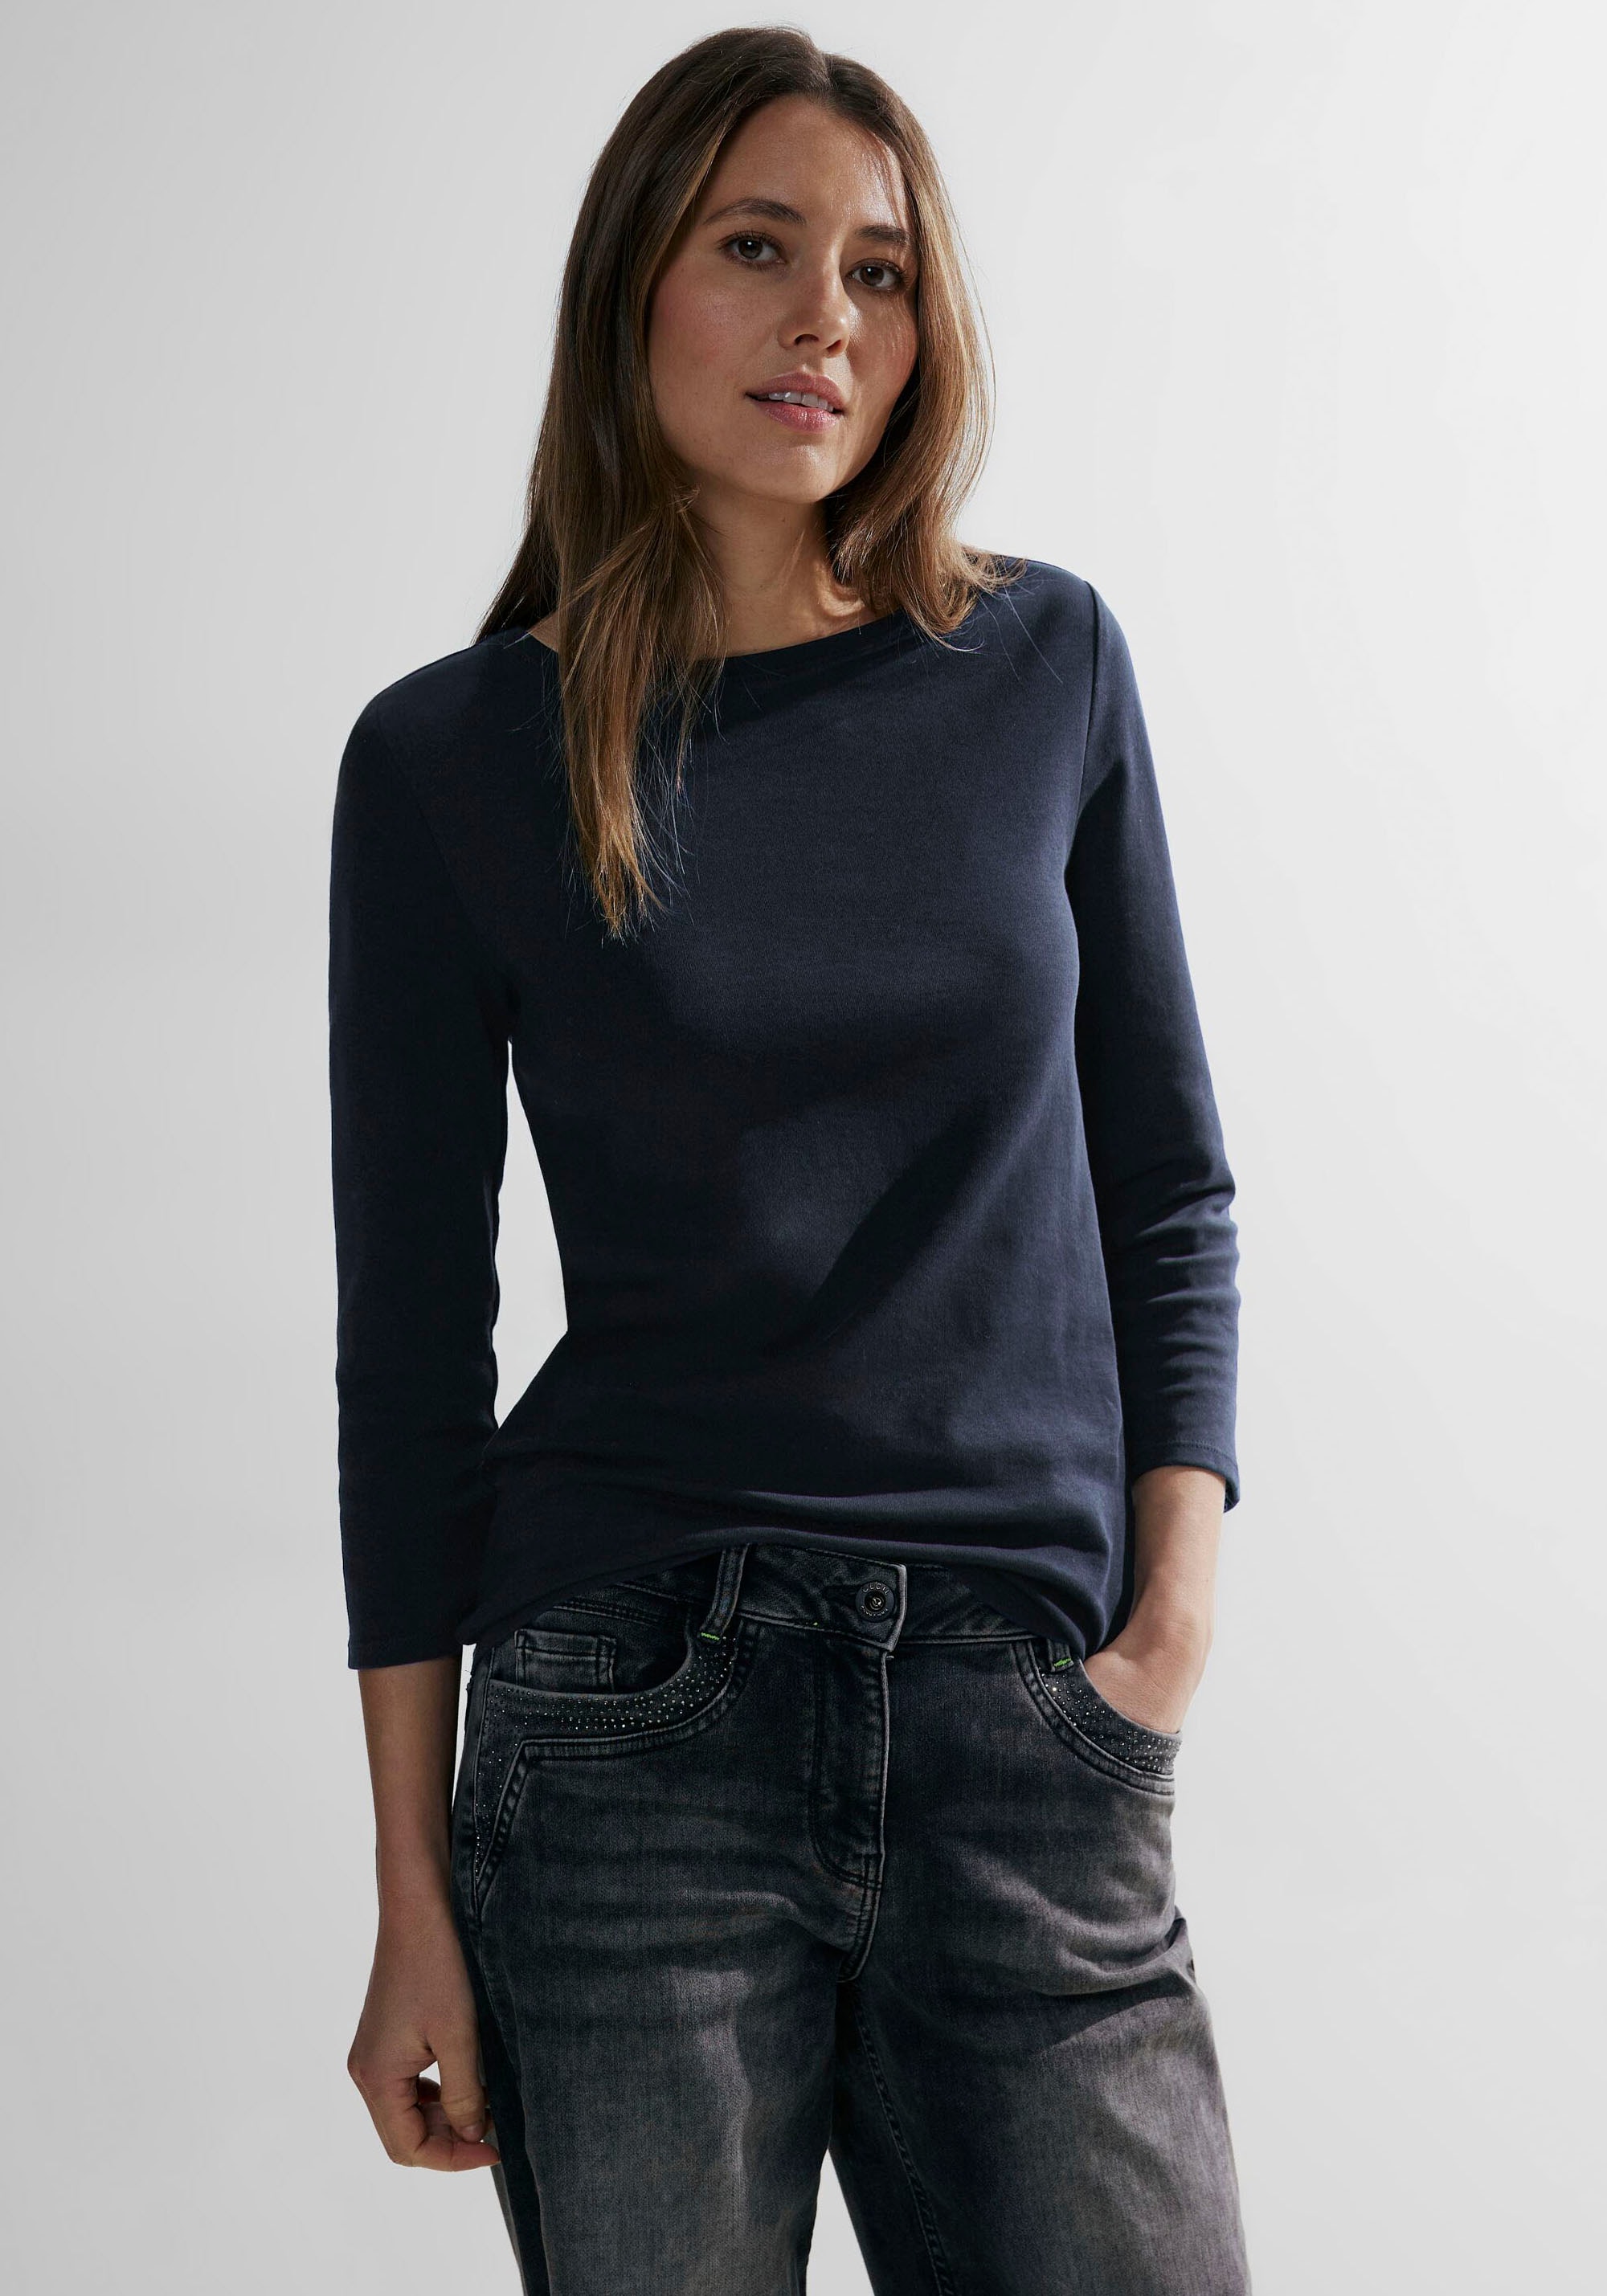 Unifarbe in Cecil Shirt bei in »Basic 3/4-Arm-Shirt online Unifarbe«,